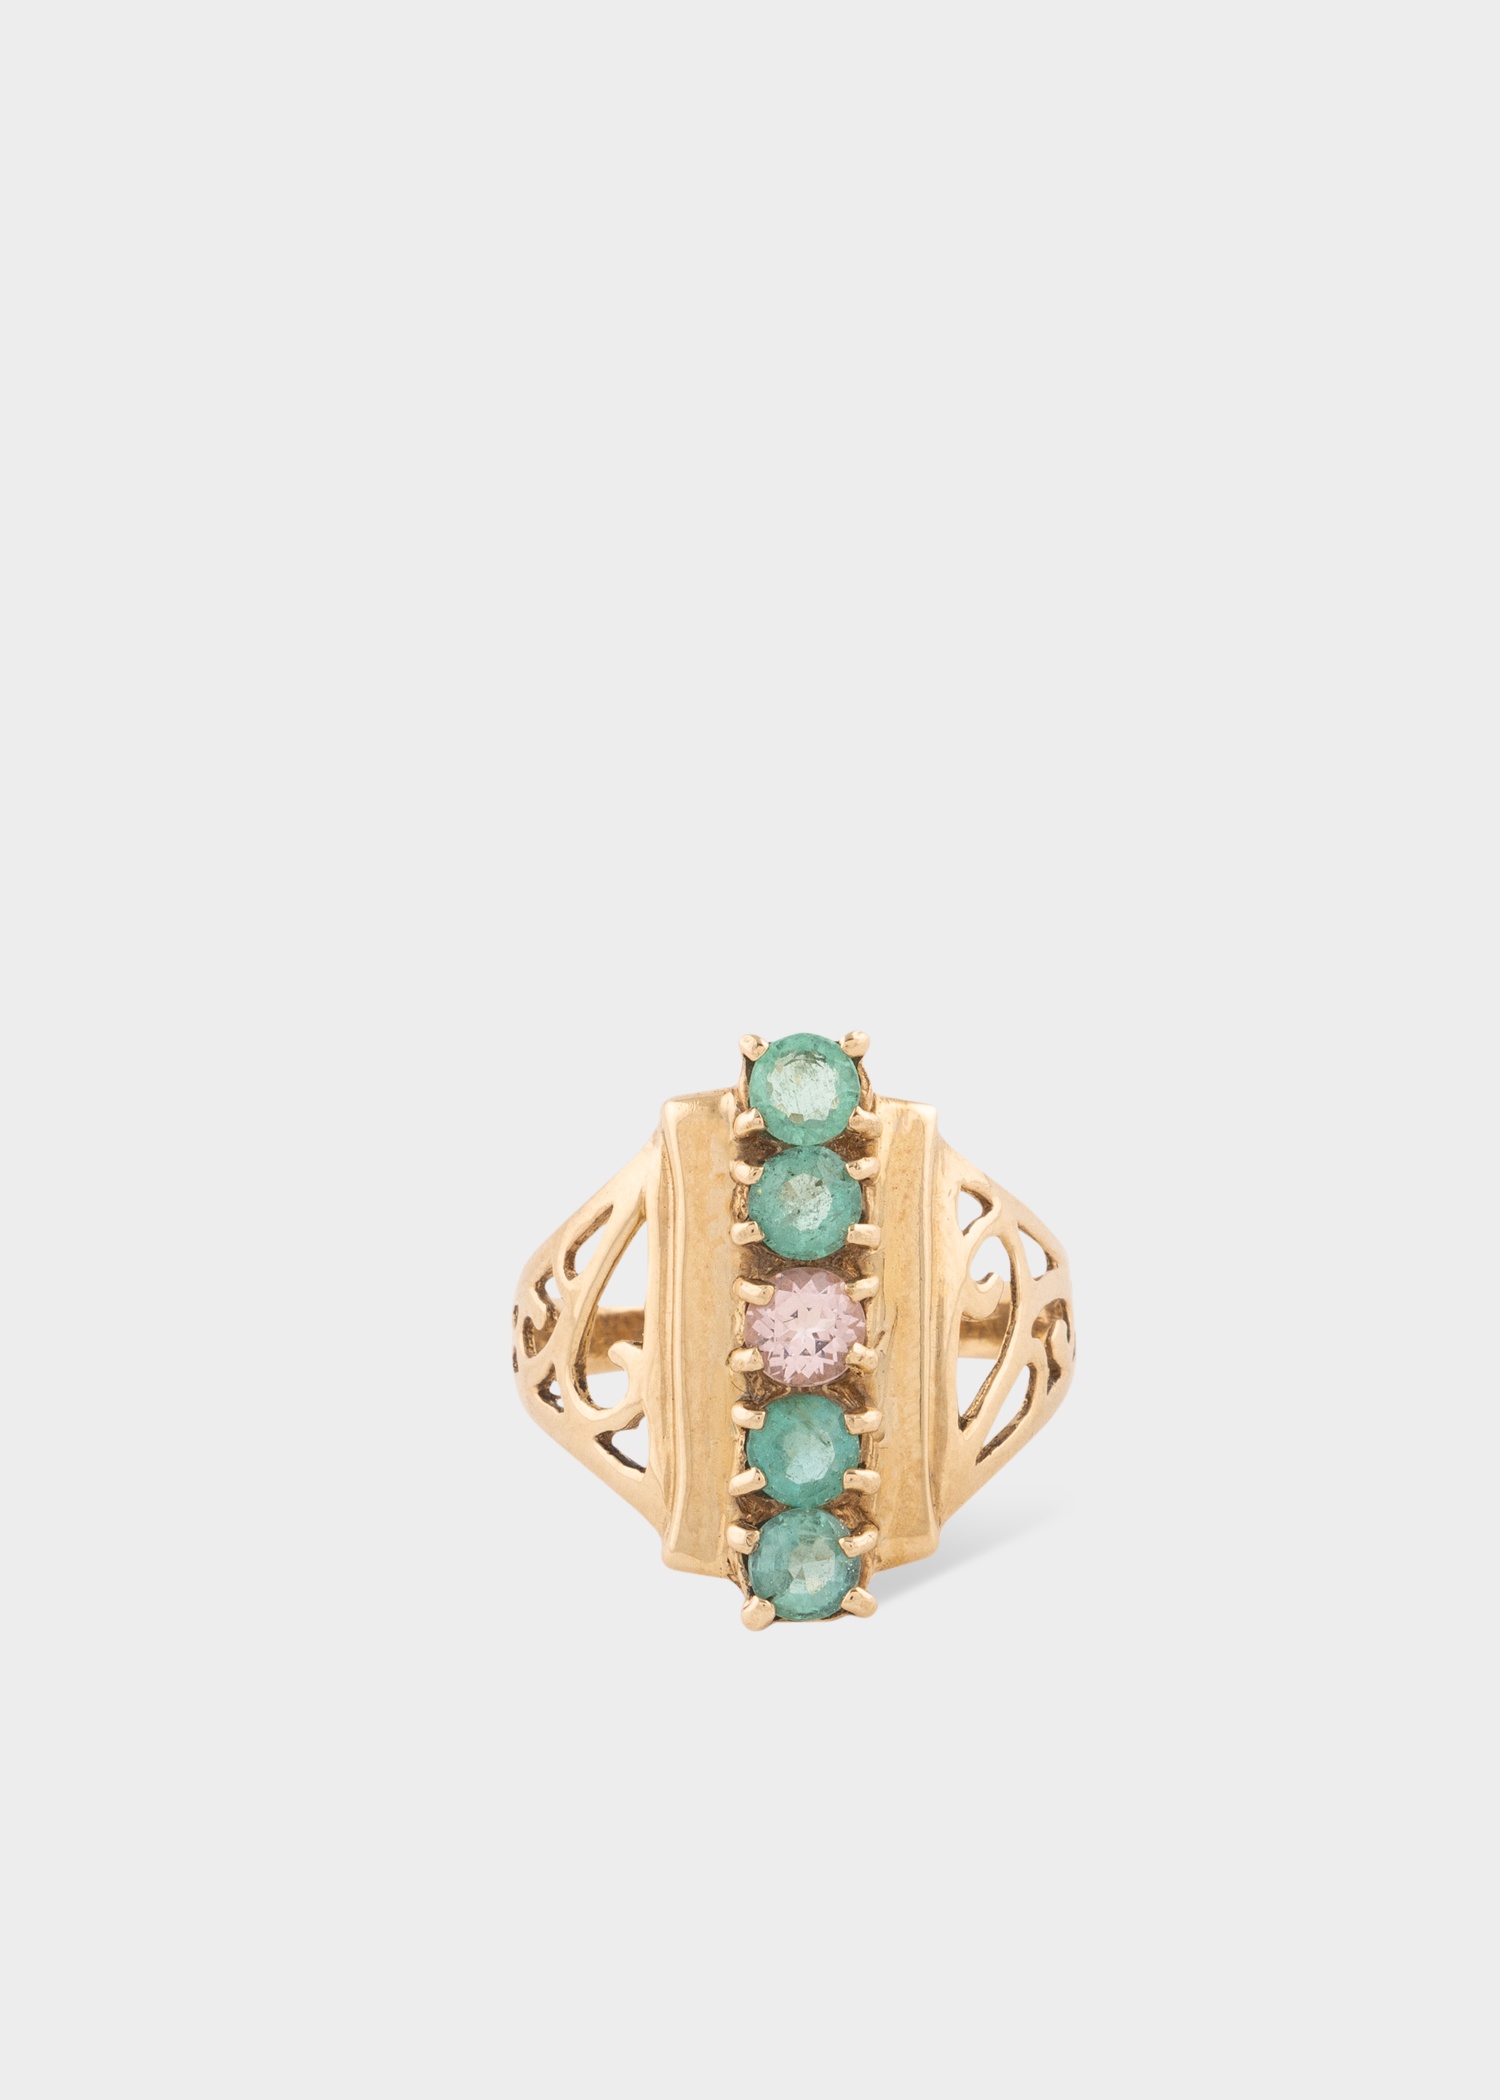 'Extravagant Emerald and Morganite' Gold Cocktail Ring by Barqoue Rocks - 1